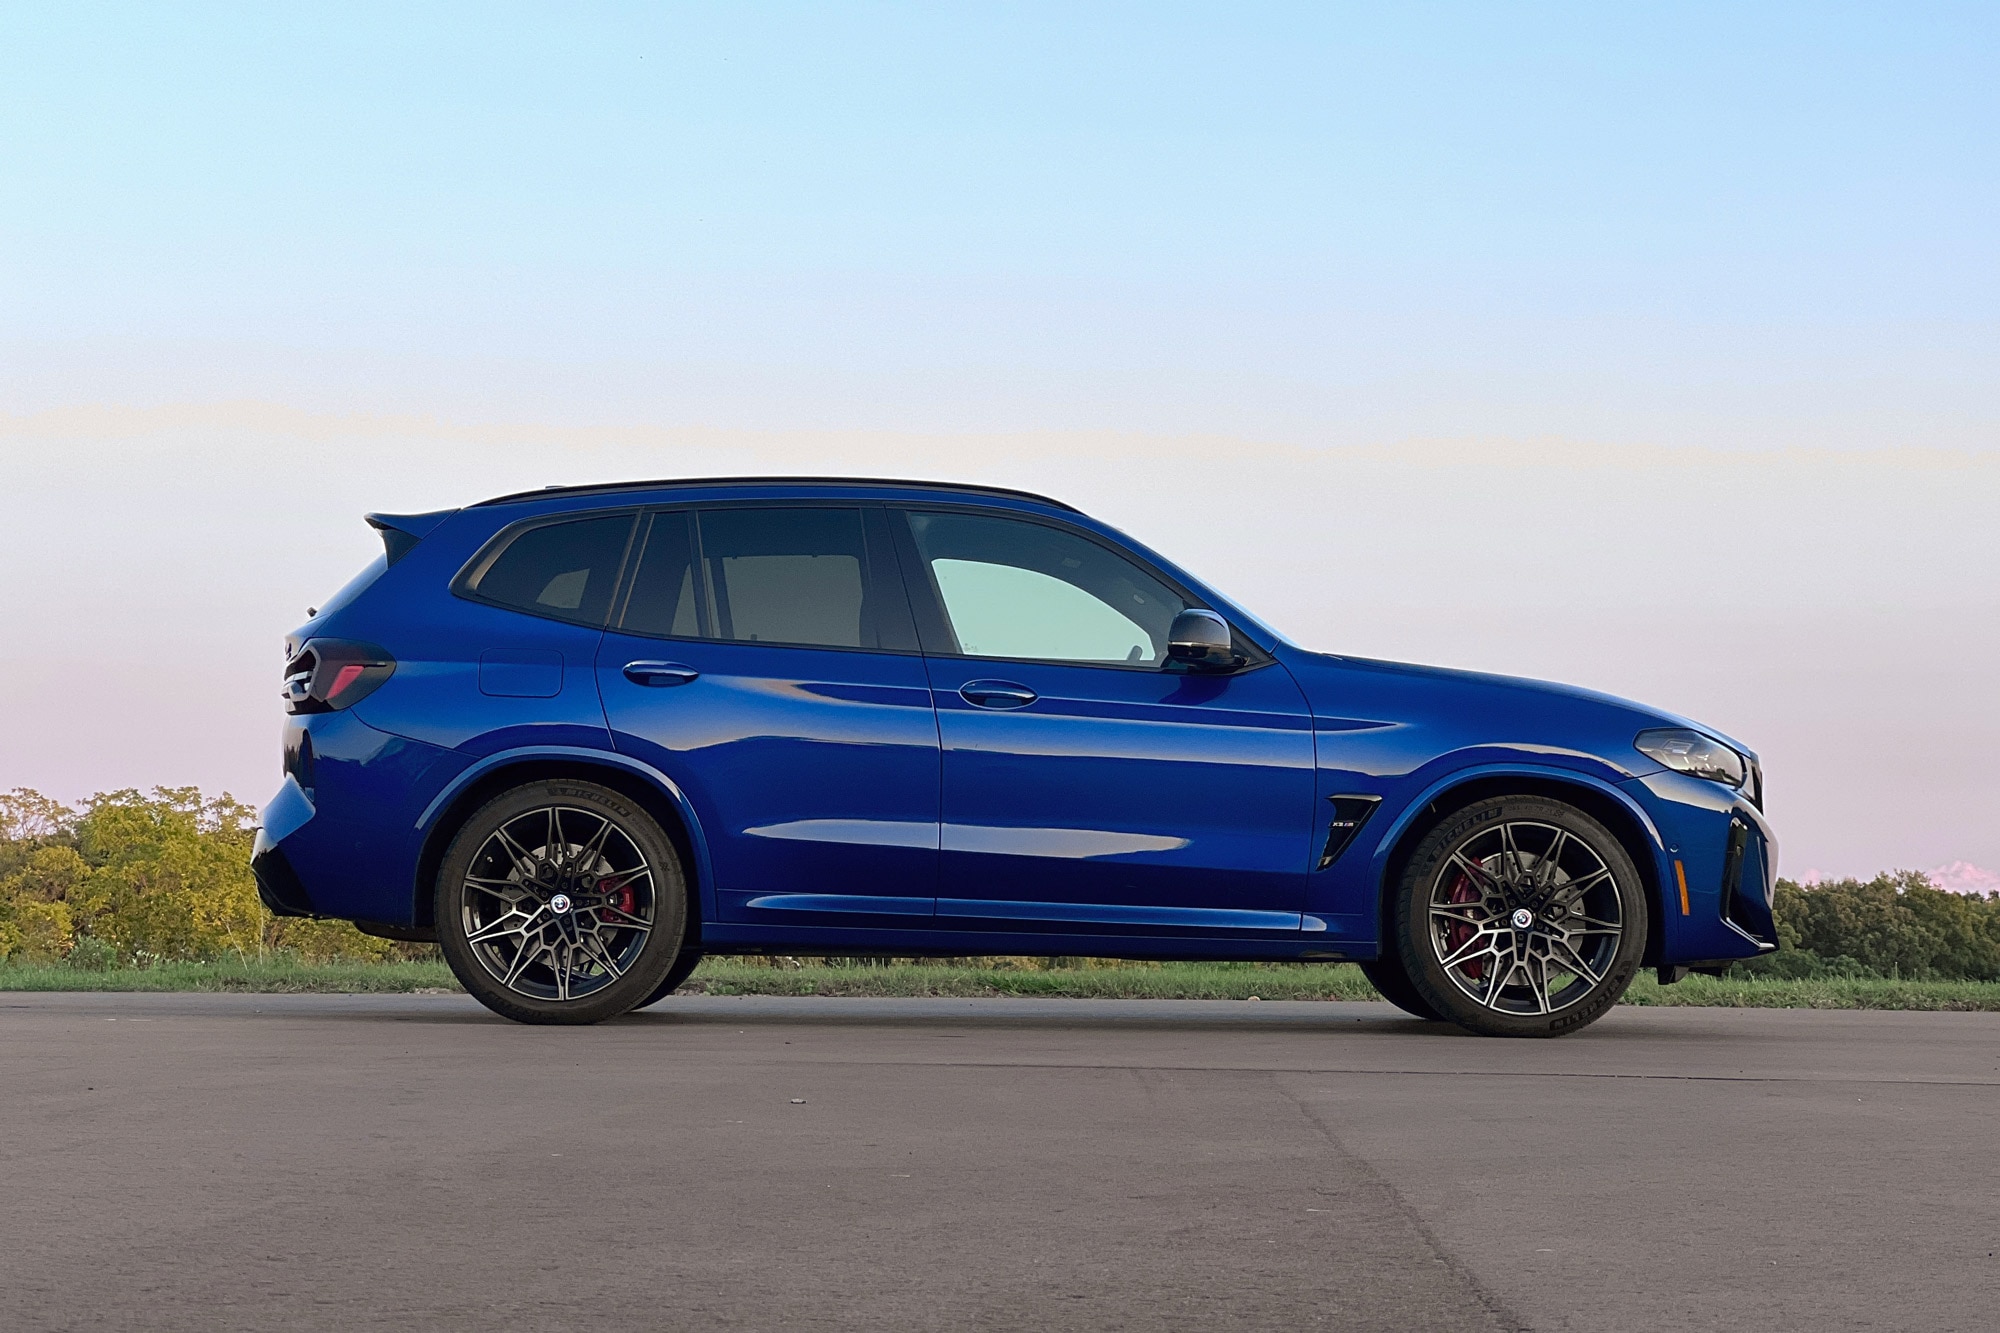 2023 BMW X3 M in Le Mans Blue side view parked next to grass